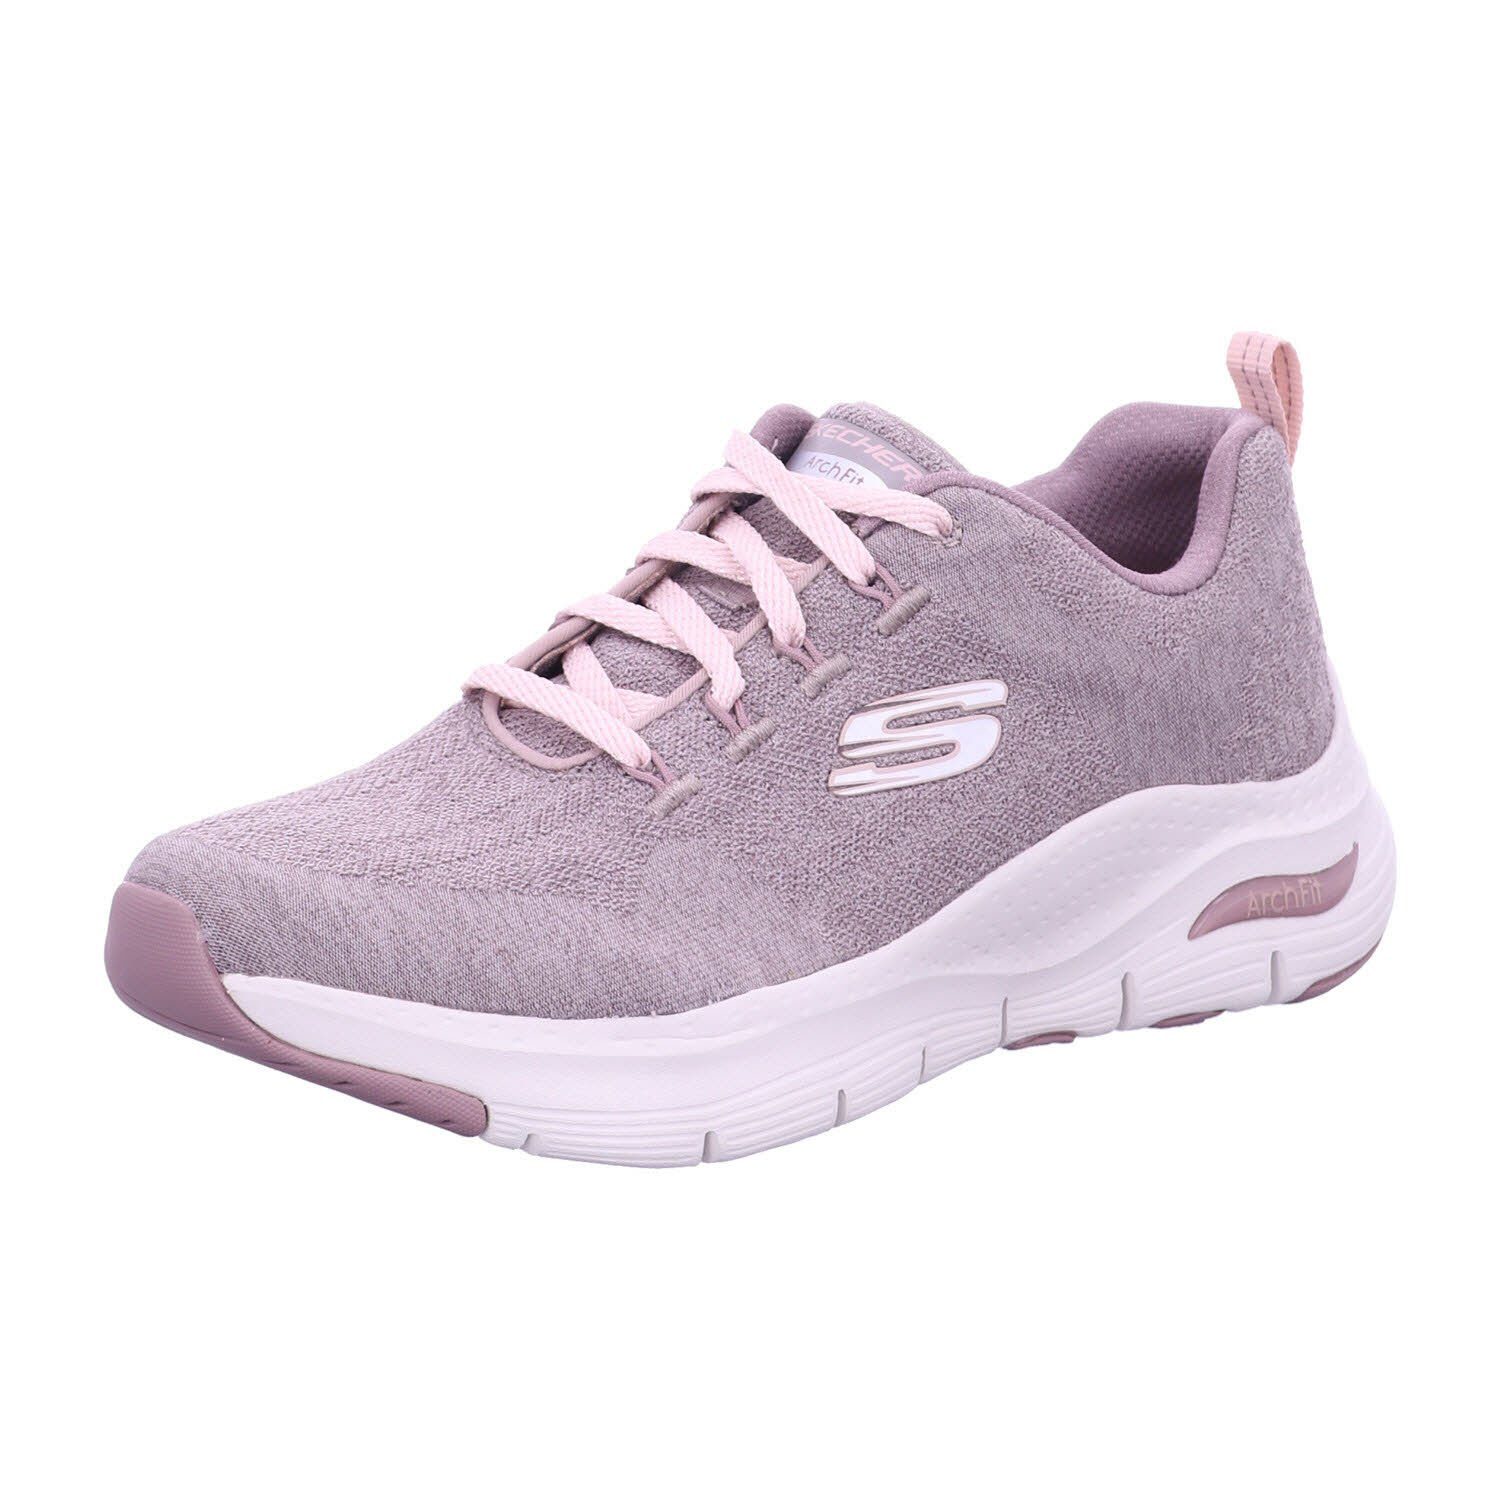 Sneaker dark taupe - COMFY Skechers ARCH FIT WAVE (2-tlg)